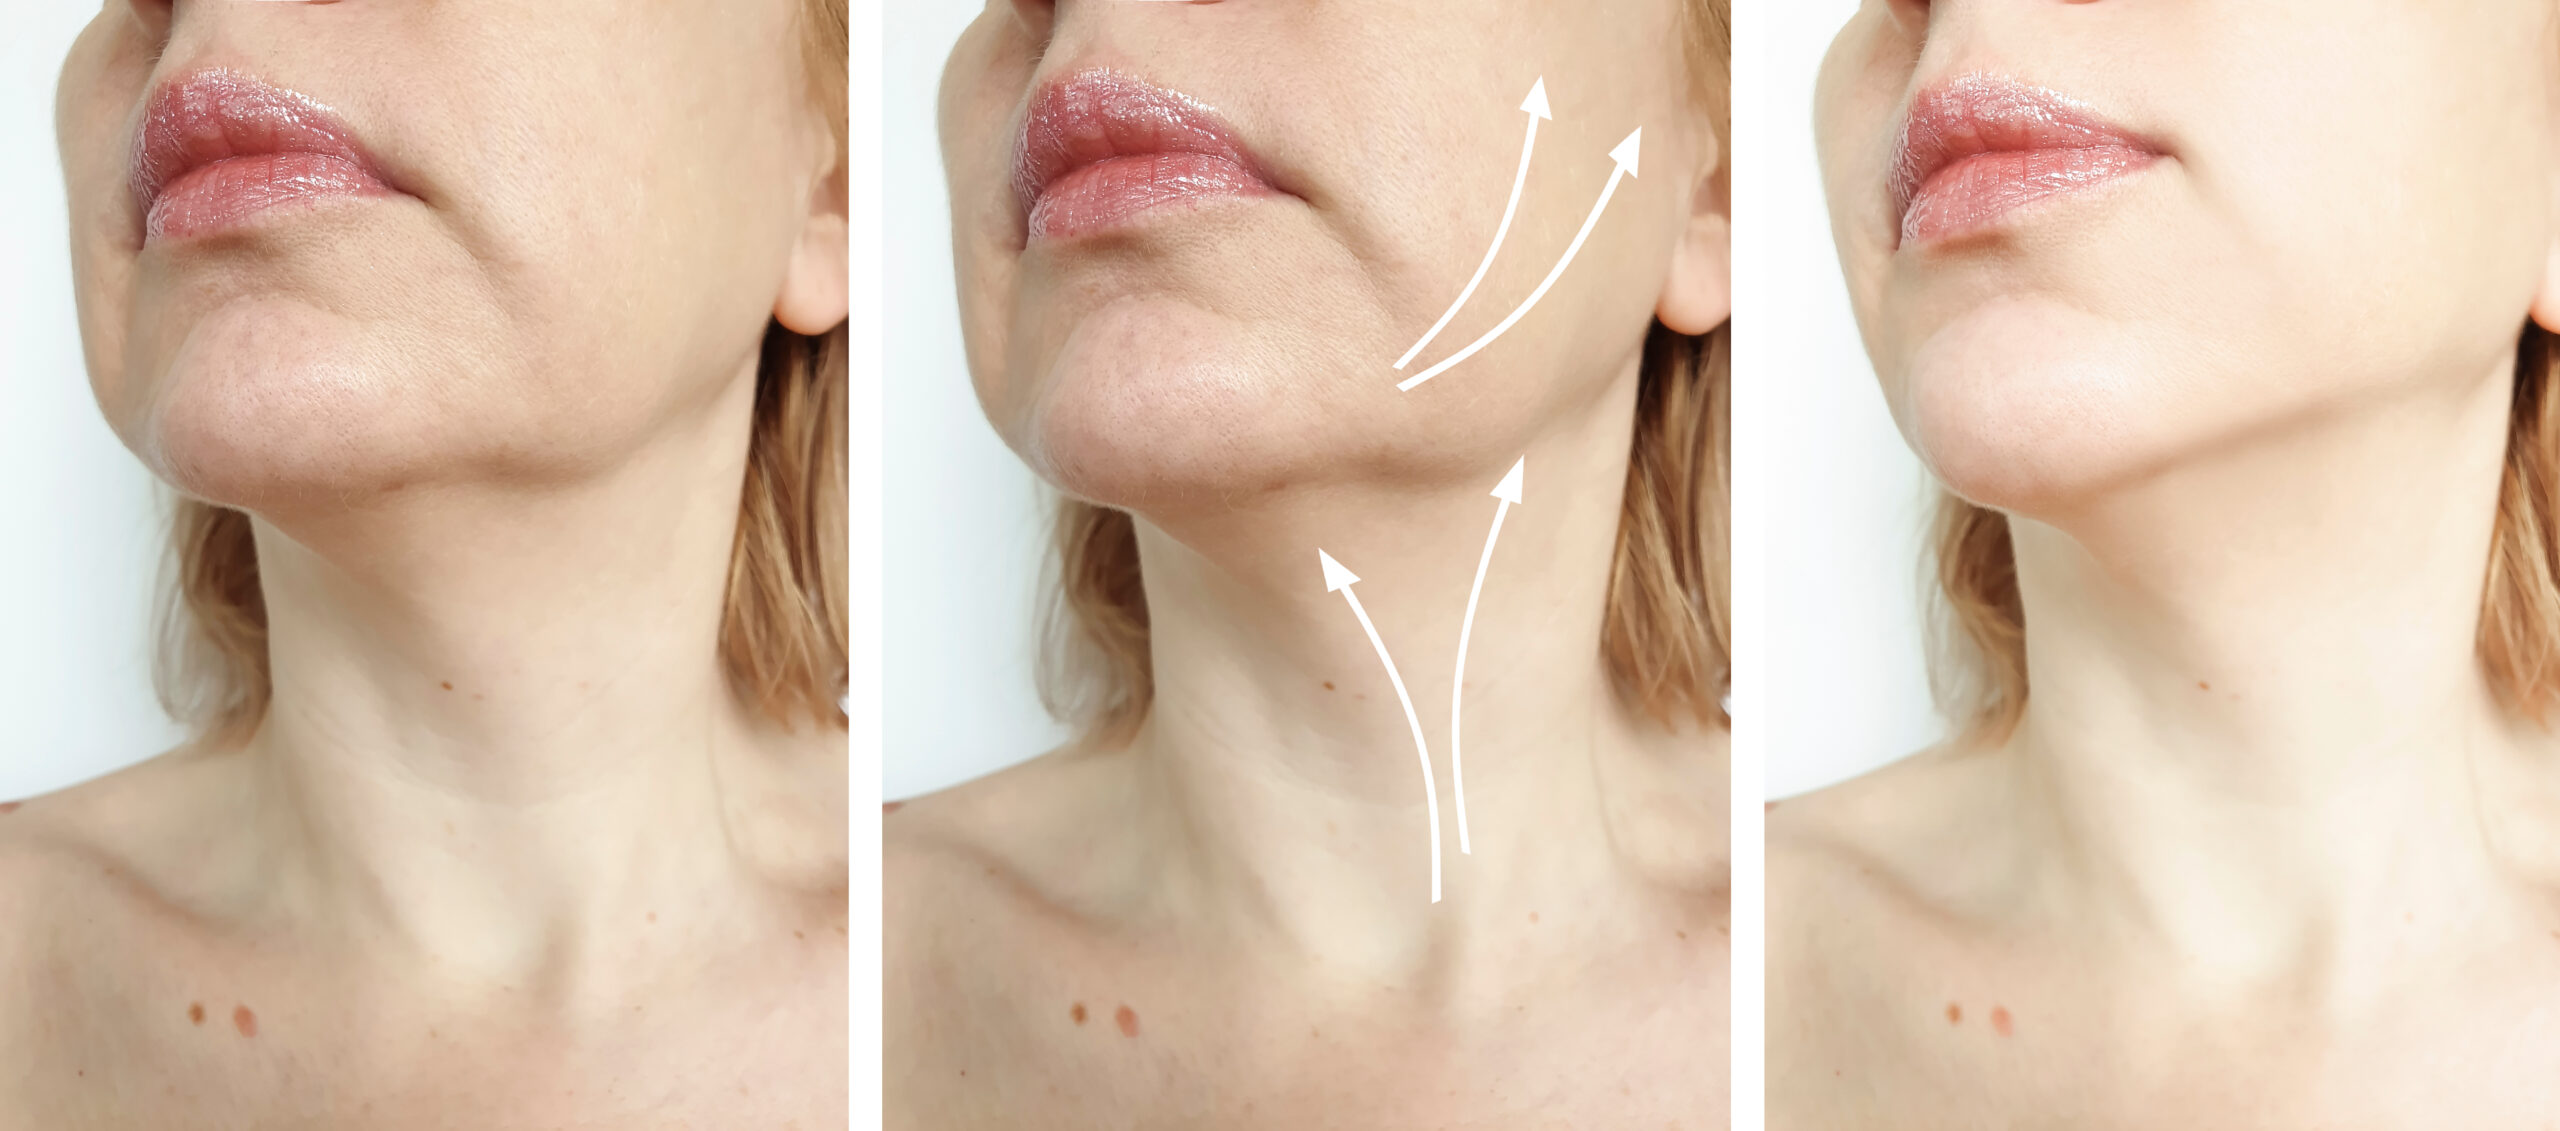 Double Chin - Before And After Treatment